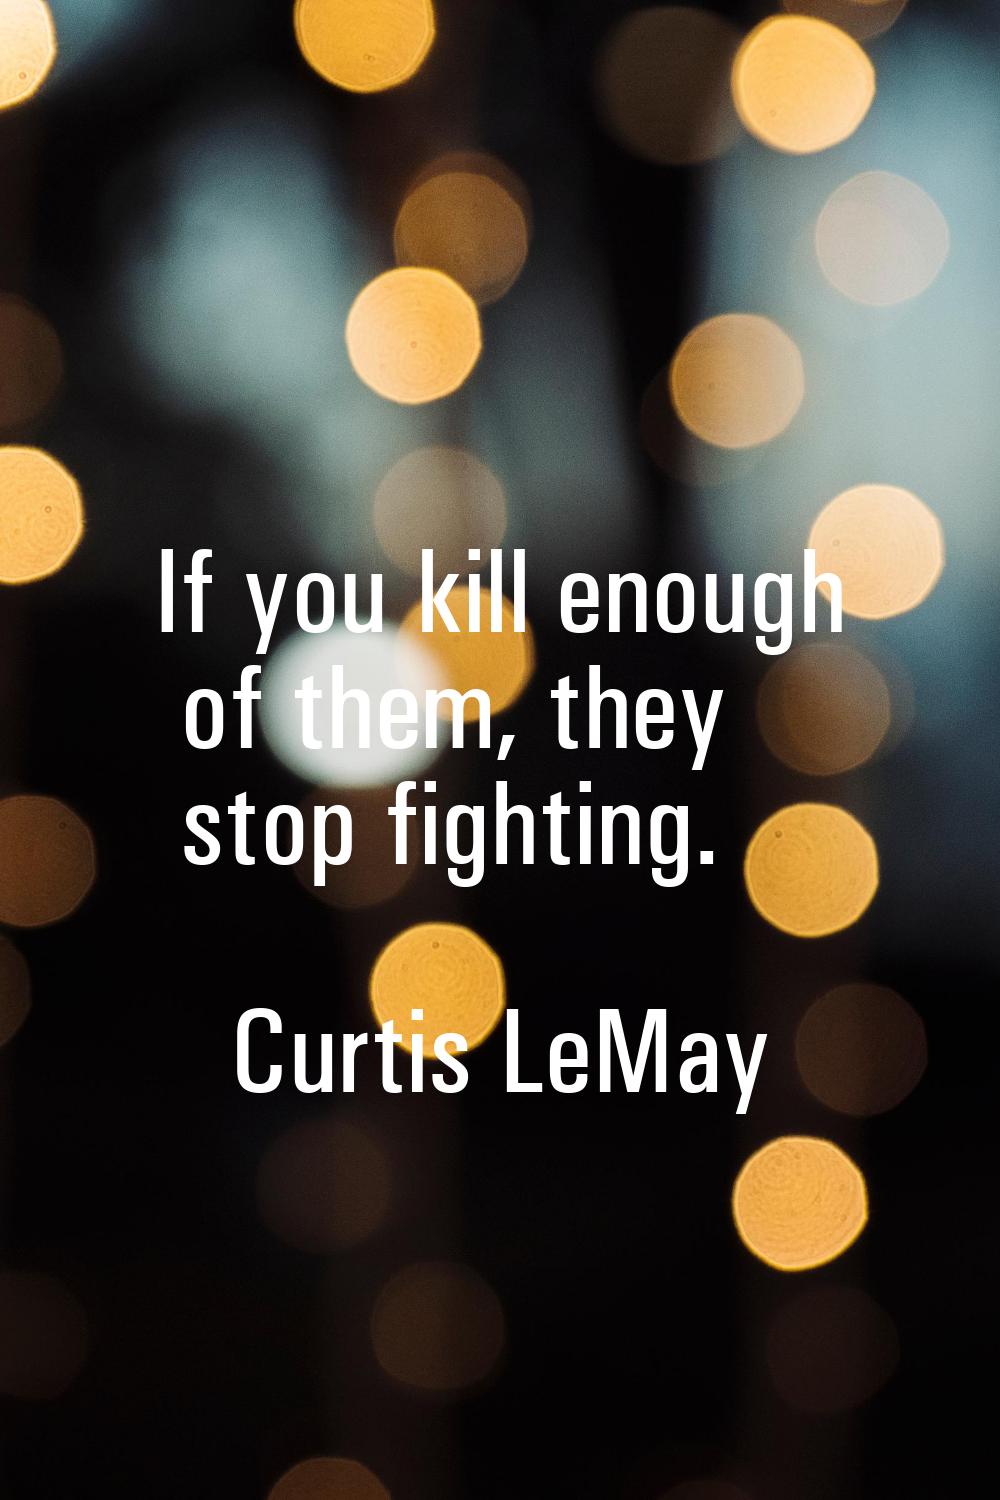 If you kill enough of them, they stop fighting.